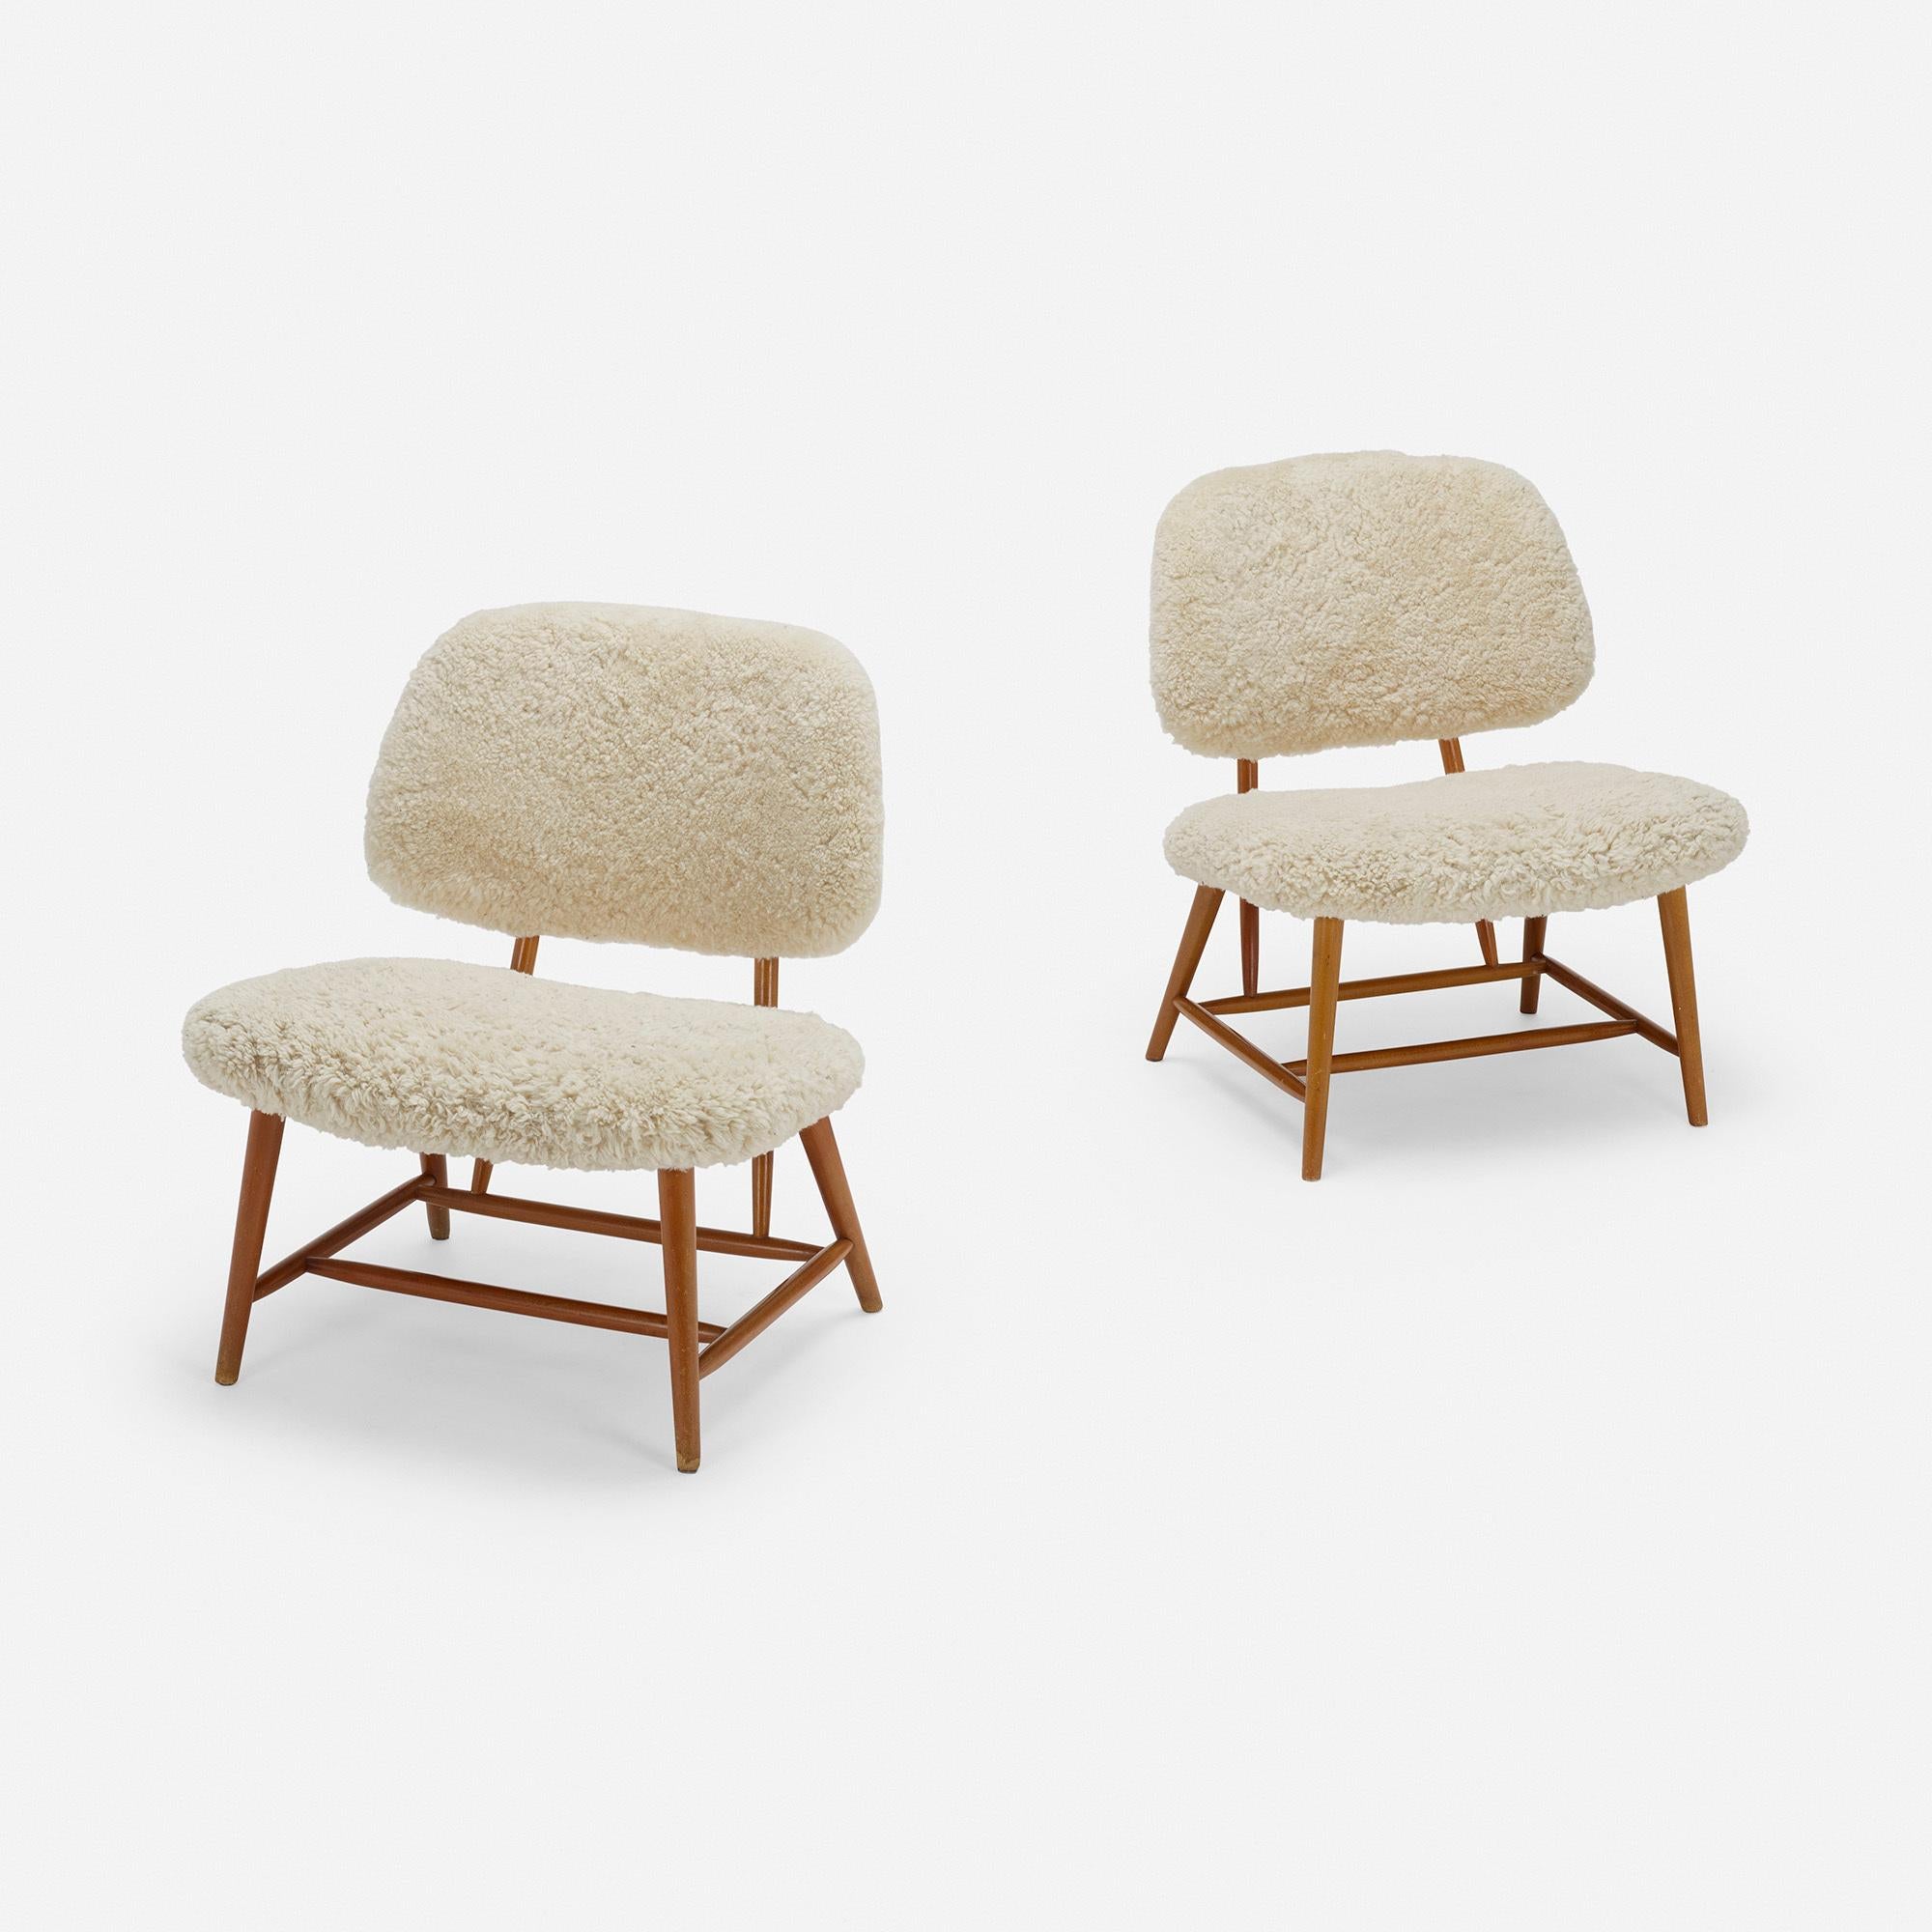 Pair of Teve chairs by Alf Svensson.

Aluminum manufacturer's label to underside of each example ‘Studio Ljungs Industrier AB Bra Bohag’.

Additional information:
Made in Sweden
Material: Birch, faux sheepskin, brass
Size: 25 W × 24 D ×